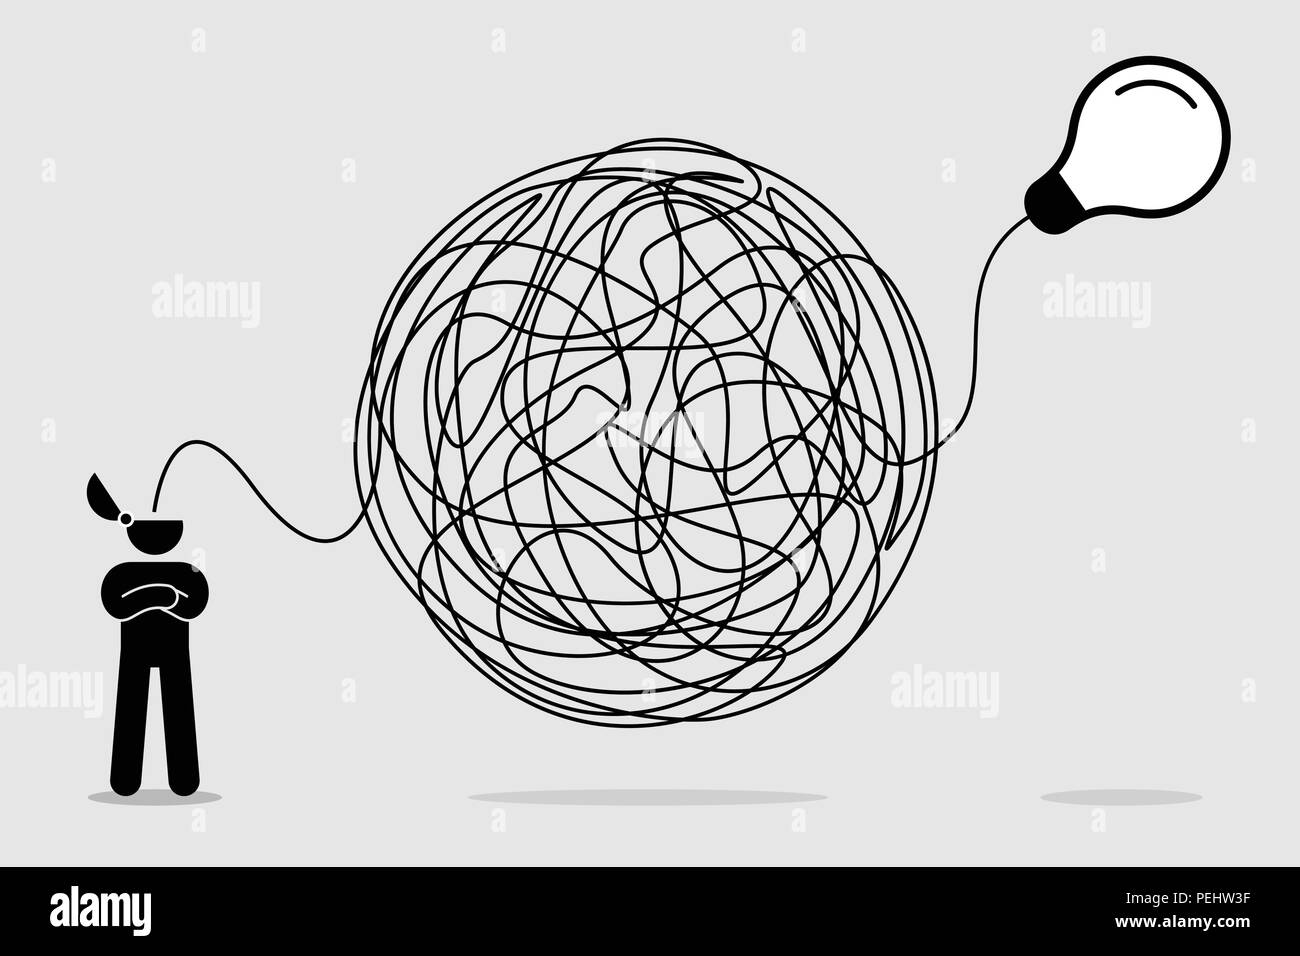 Vector artwork depicts haywire, chaos, intellect, mind, and brainwork. Stock Vector